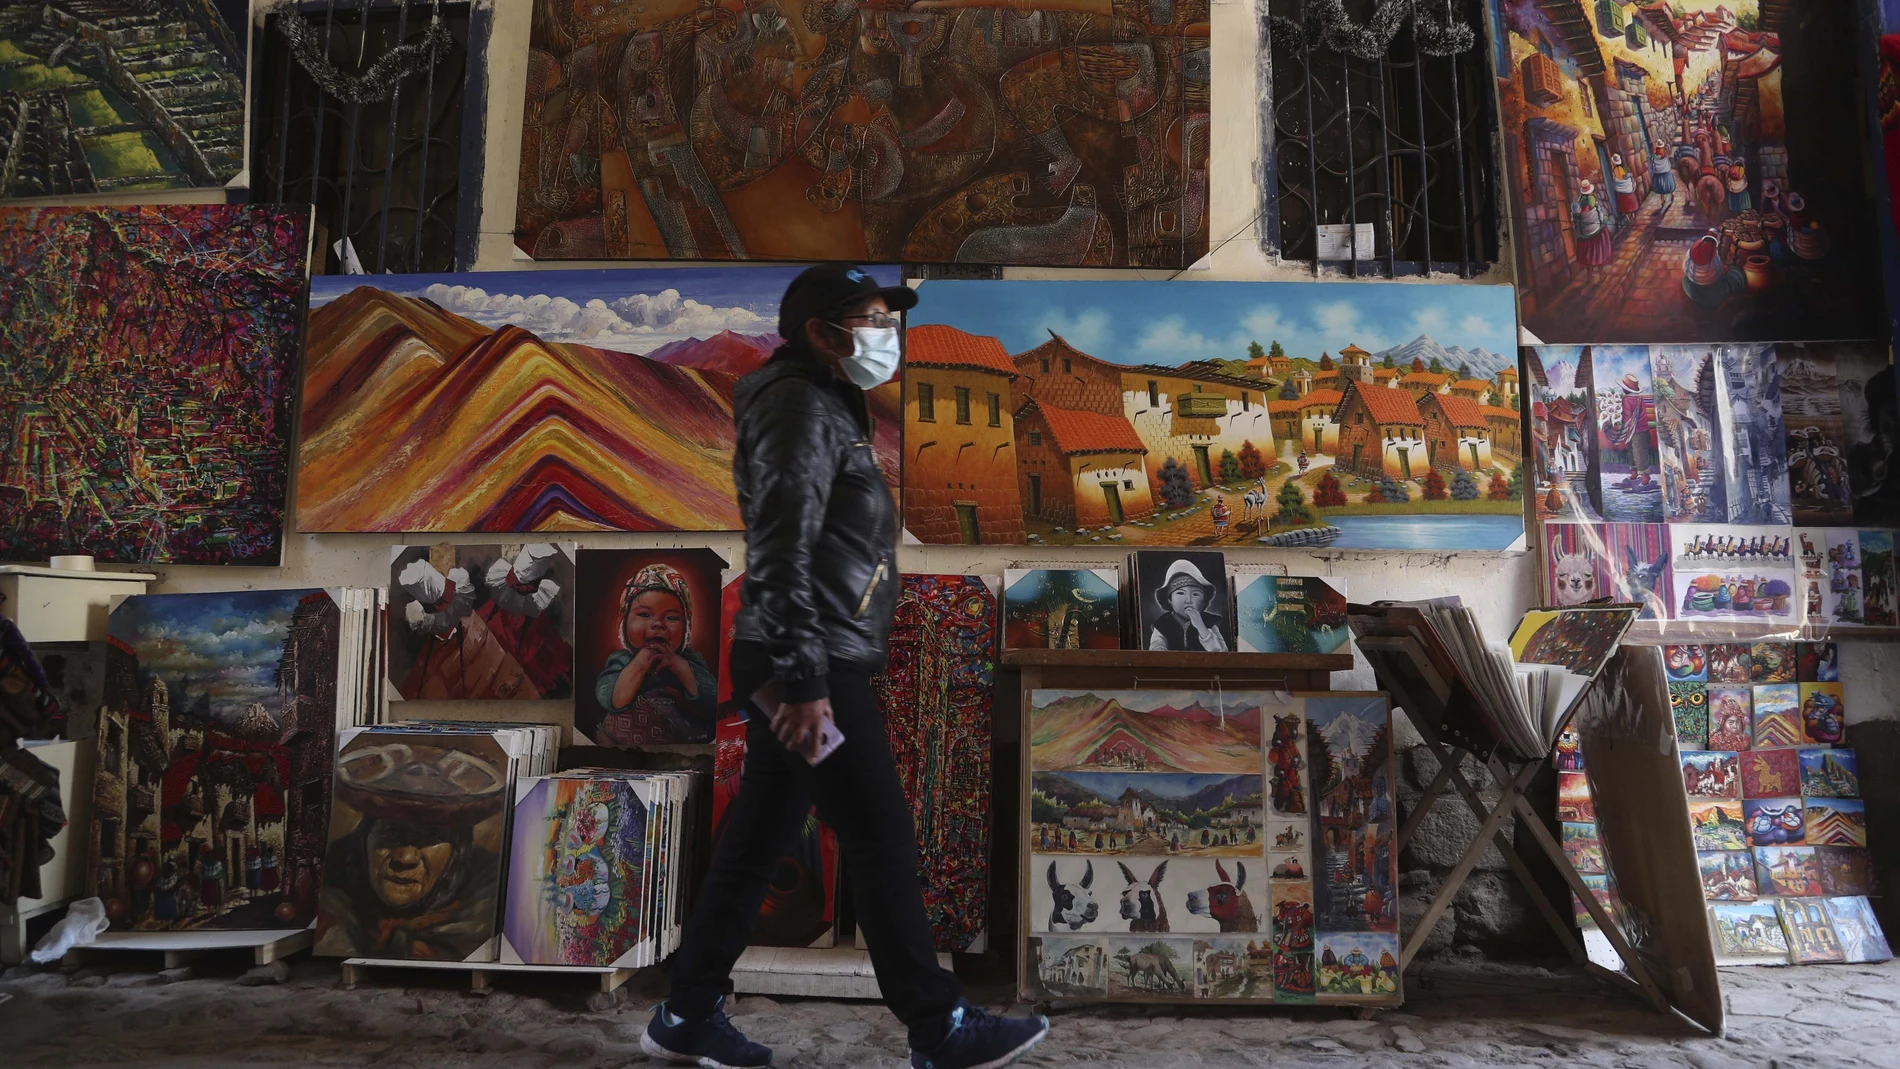 Artist Elizabeth Correa waits for clients to her paints amid the COVID-19 pandemic Cusco, Peru, Monday, Oct. 26, 2020. Cusco, the historic capital of the Inca empire near Machu Picchu lives almost entirely from international tourism and is suffering the worst crisis in its recent history. (AP Photo/Martin Mejia)